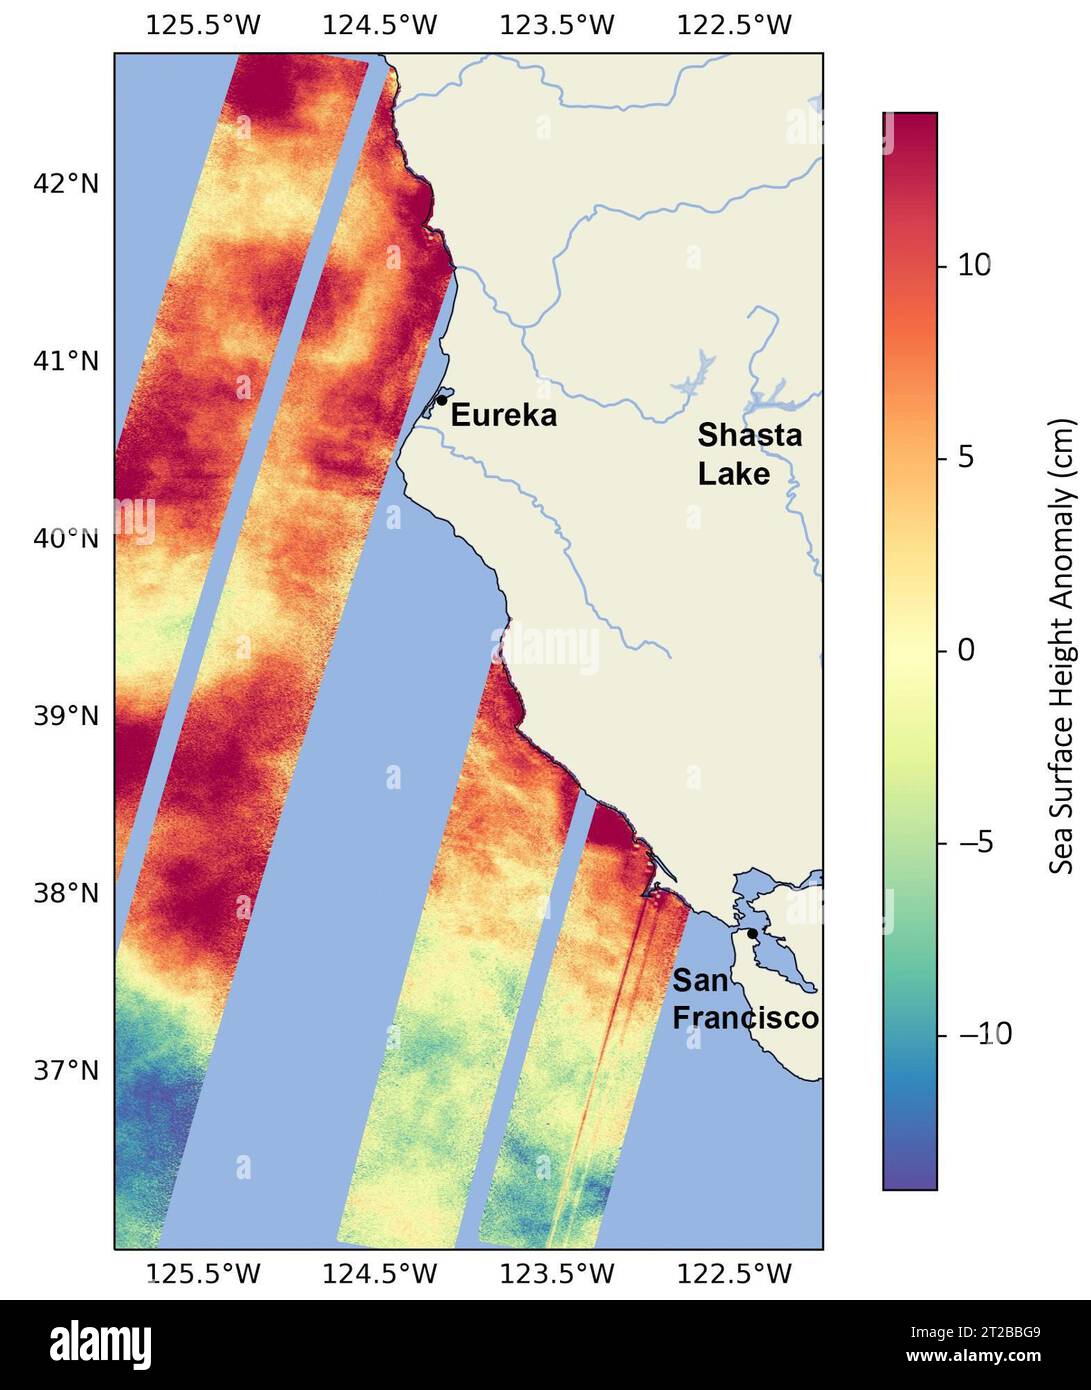 . SWOT Monitors Warming Waters Off California Coast. This data visualization image above shows sea surface heights off the northern California coast in August 2023 as measured by the Surface Water and Ocean Topography (SWOT) satellite. Red indicates higher-than-average ocean heights, while blue represents lower-than-average heights. Warm ocean waters from the developing El Niño are shifting north along coastlines in the eastern Pacific Ocean. Along the coast of California, these warm waters are interacting with a persistent marine heat wave that recently influenced the development of Hurricane Stock Photo